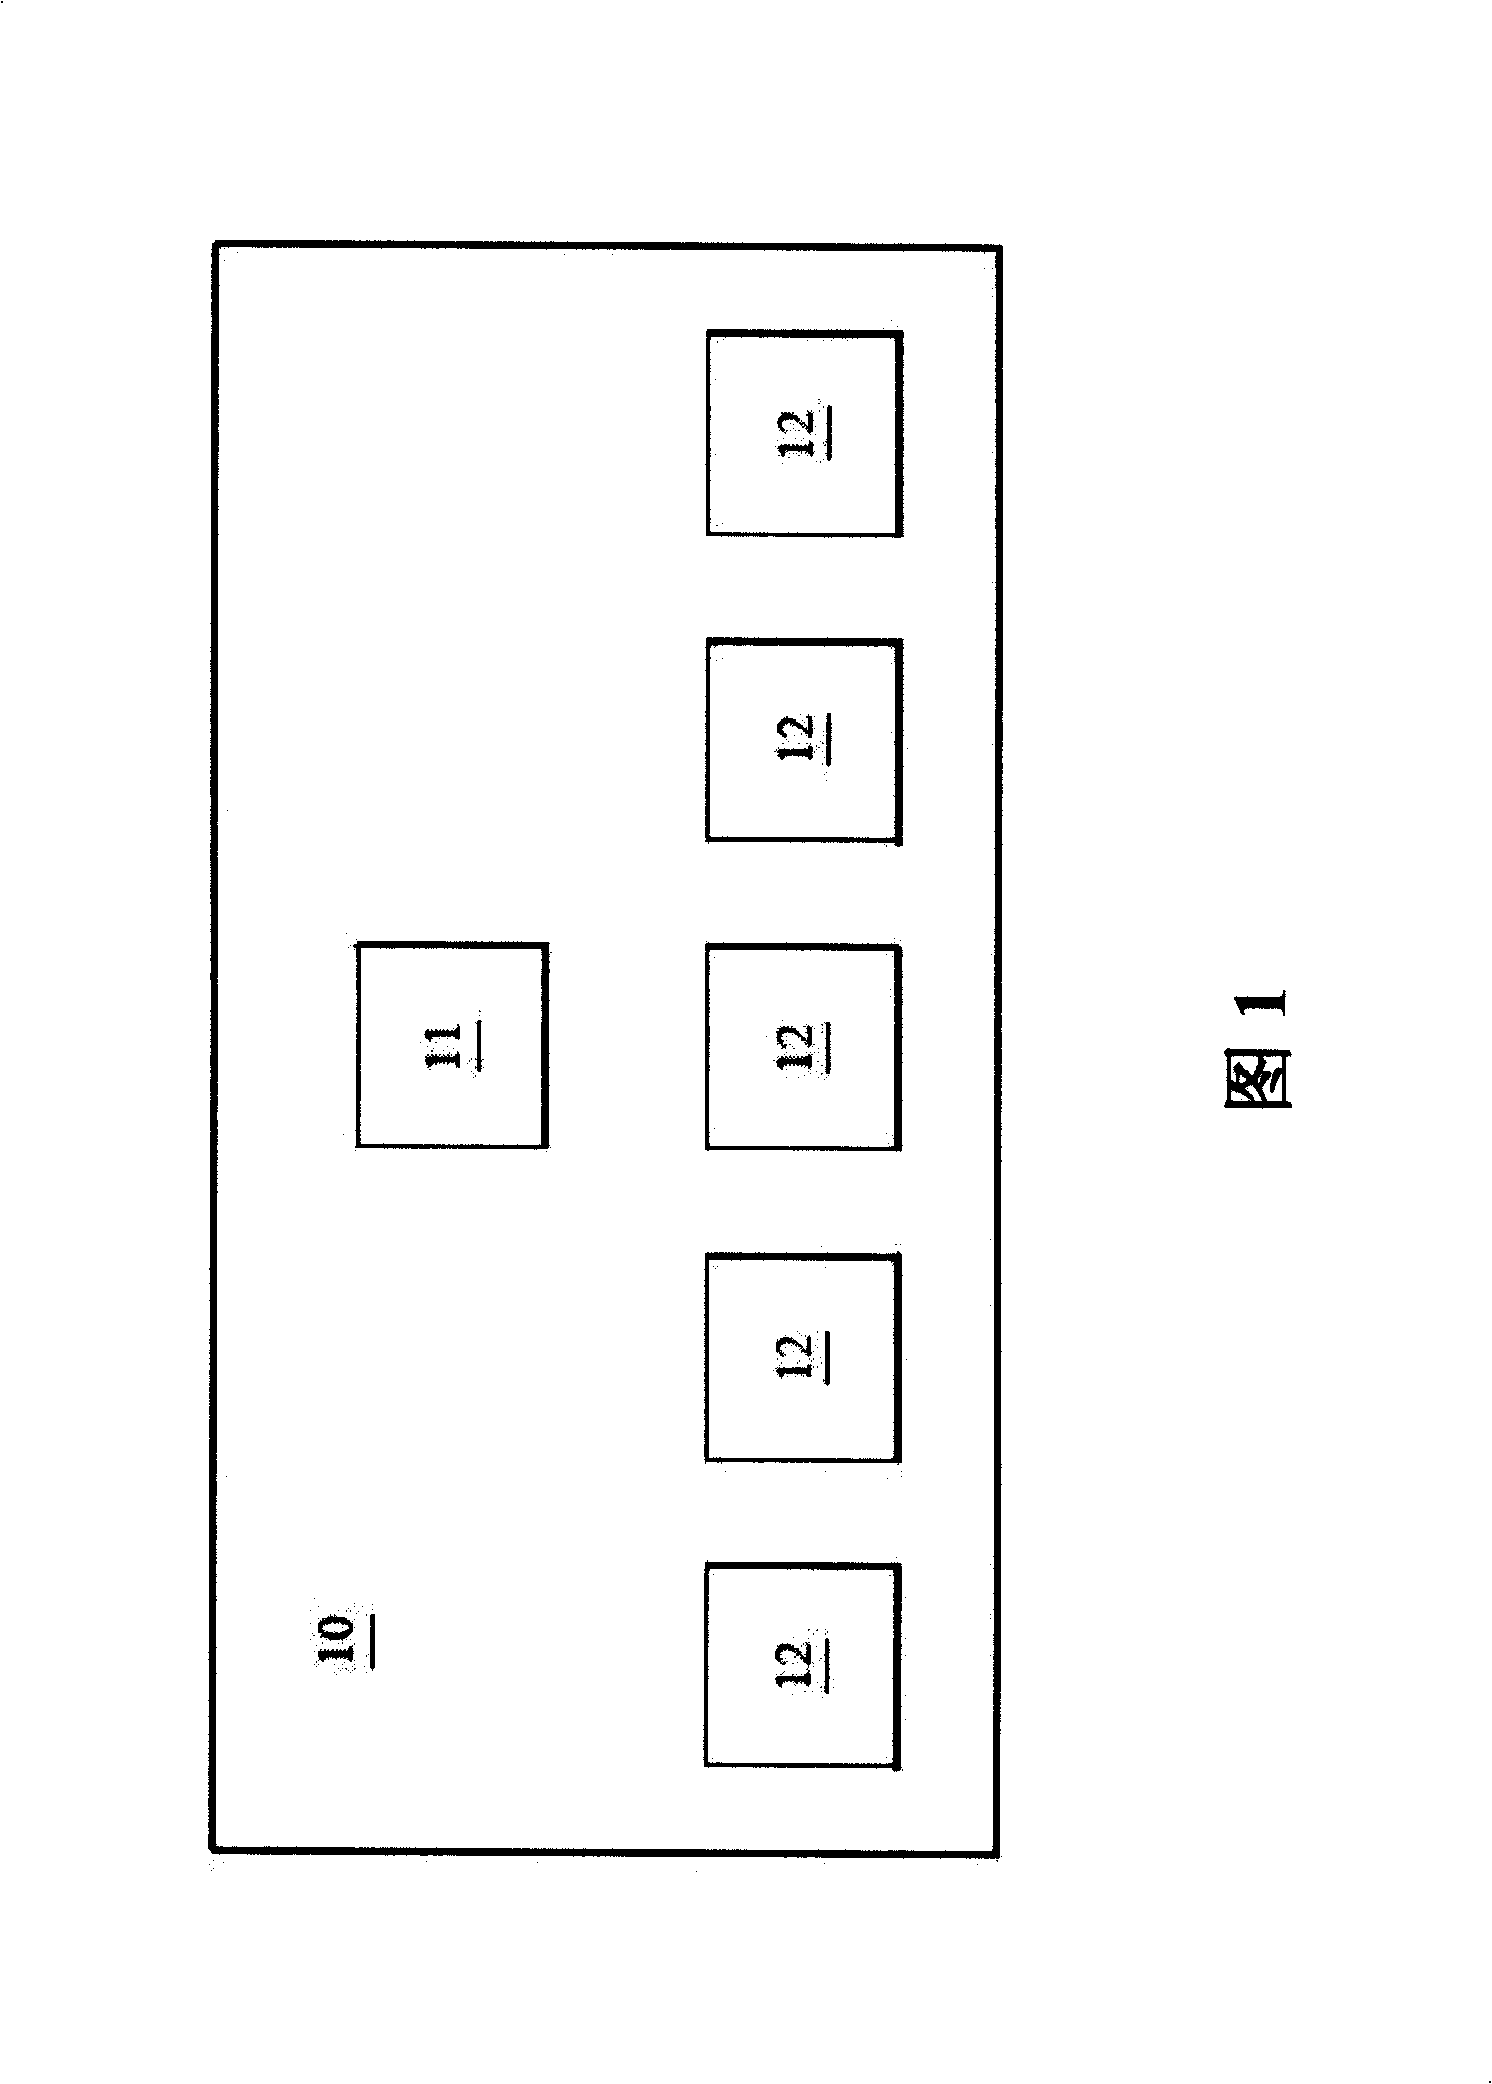 Device and method for integrating basic electric property and system function detection